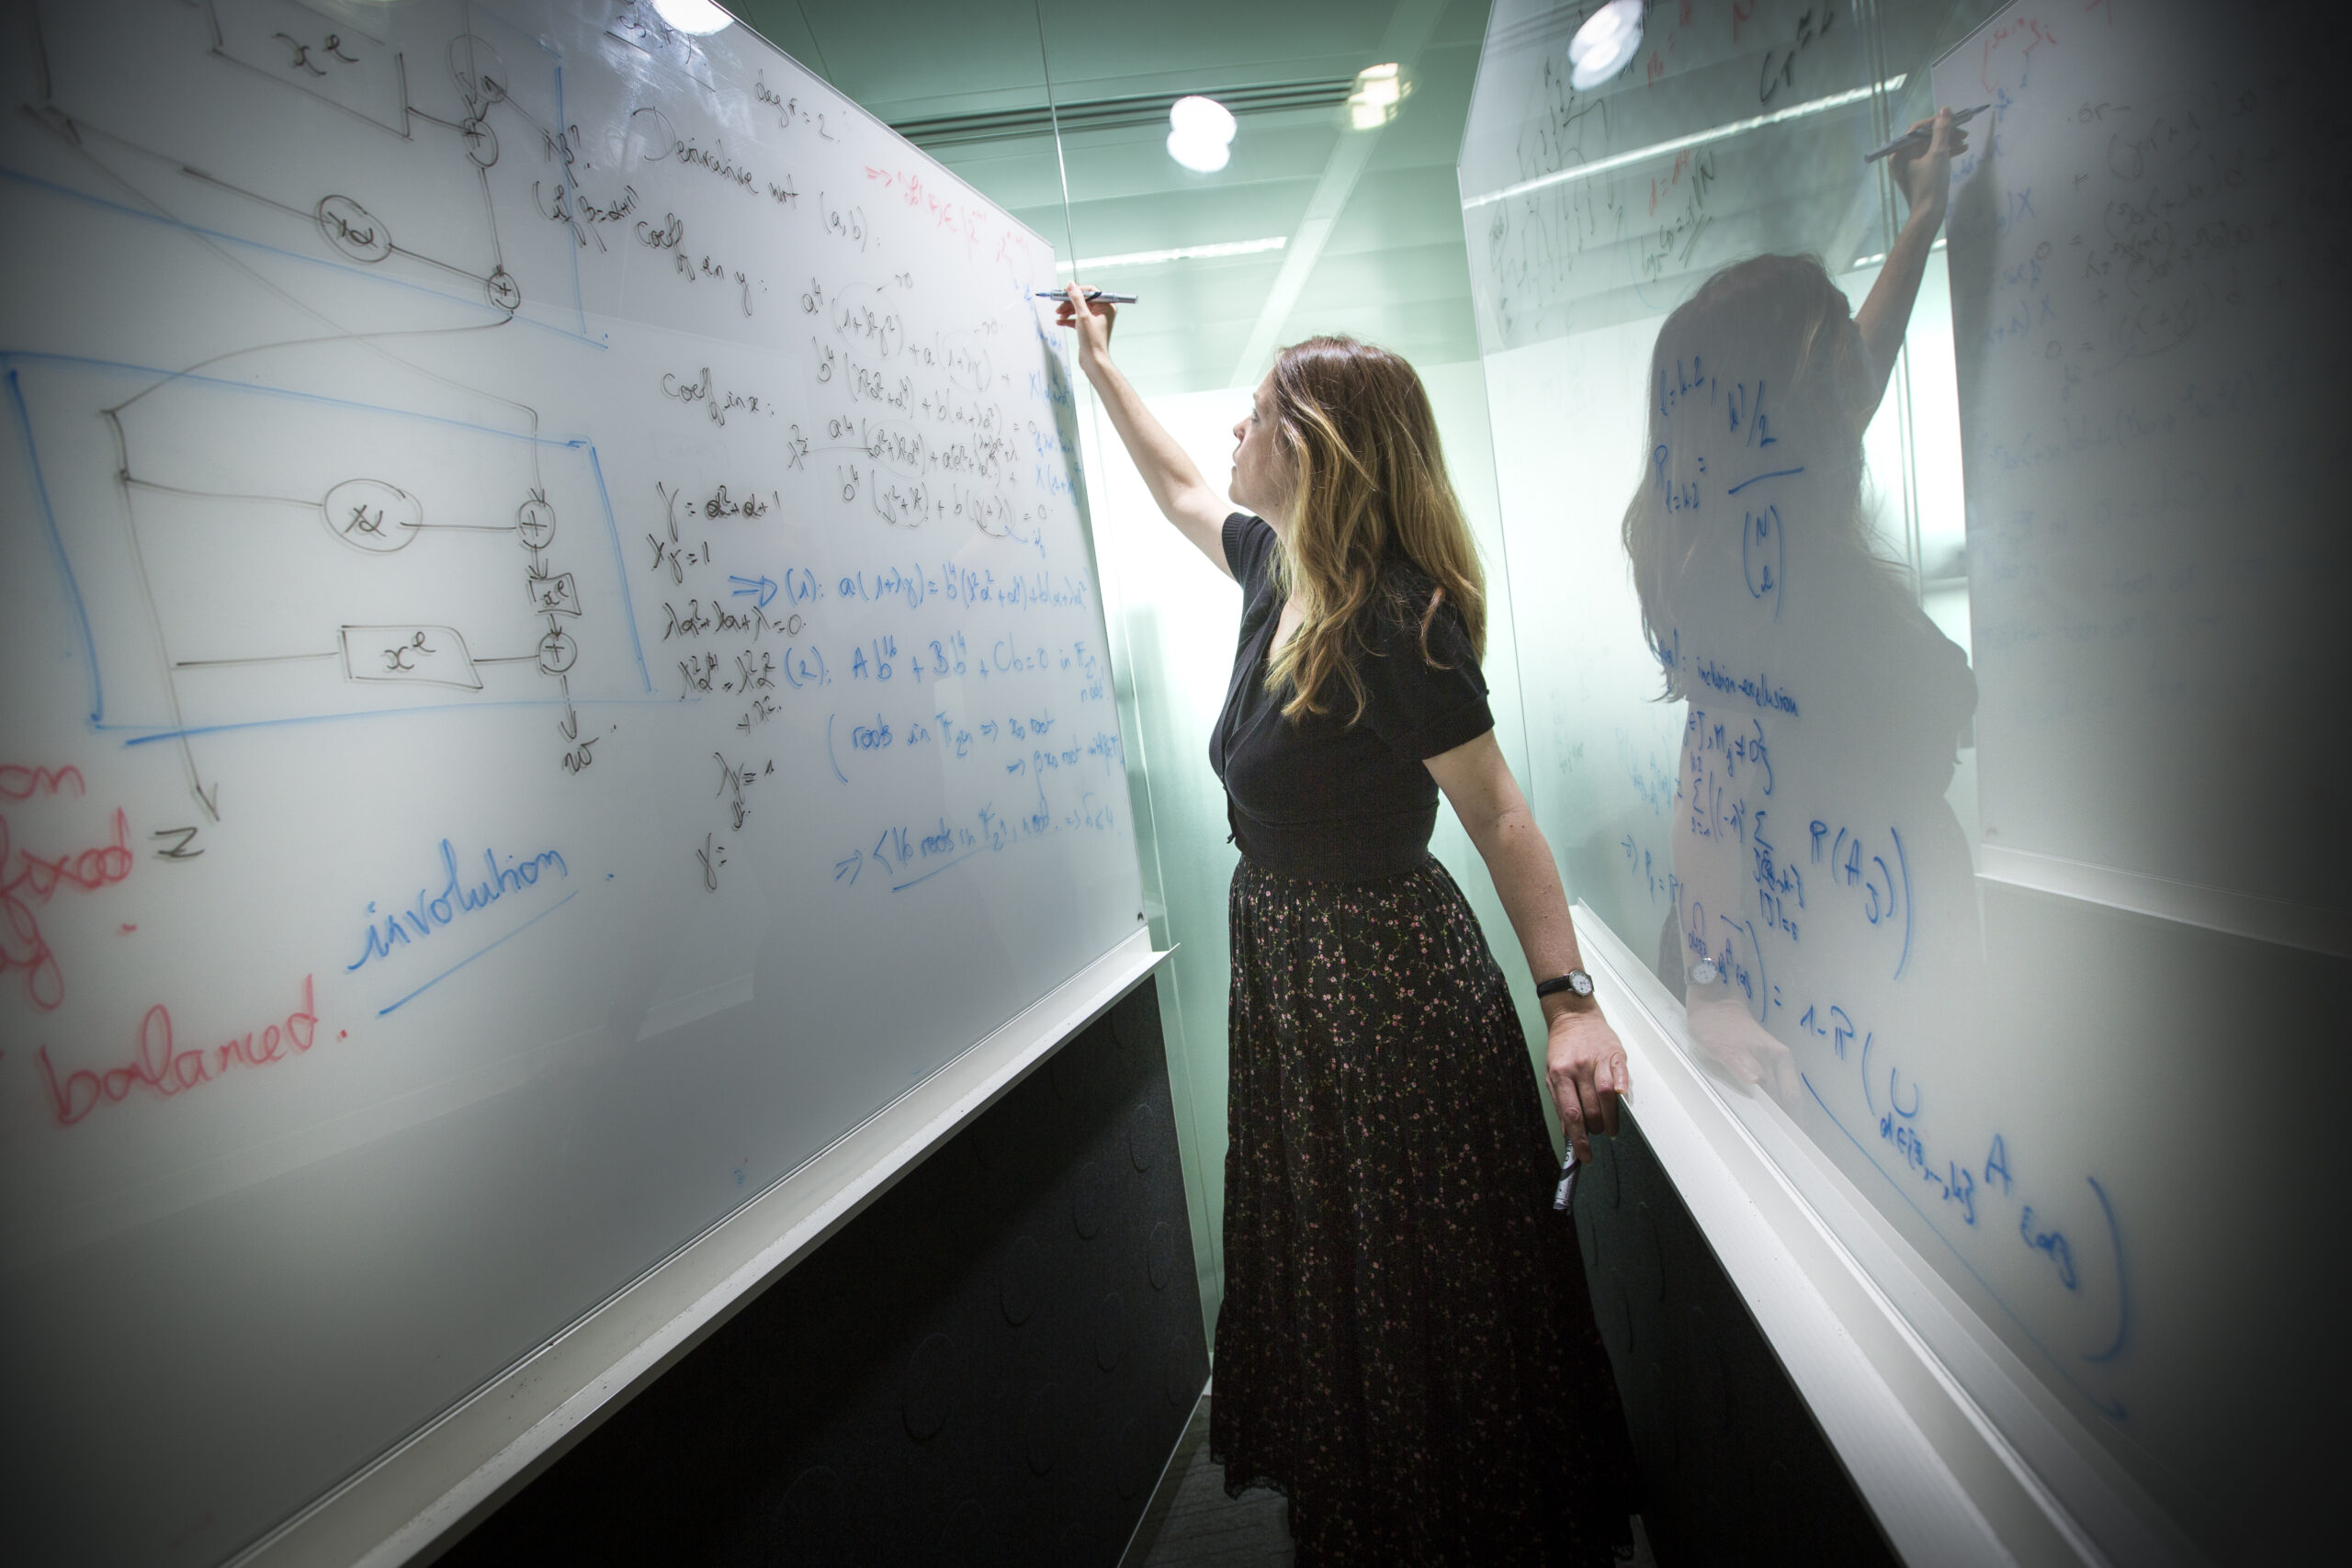 Picture of a woman, standing in between two whiteboards and writing equations on them 